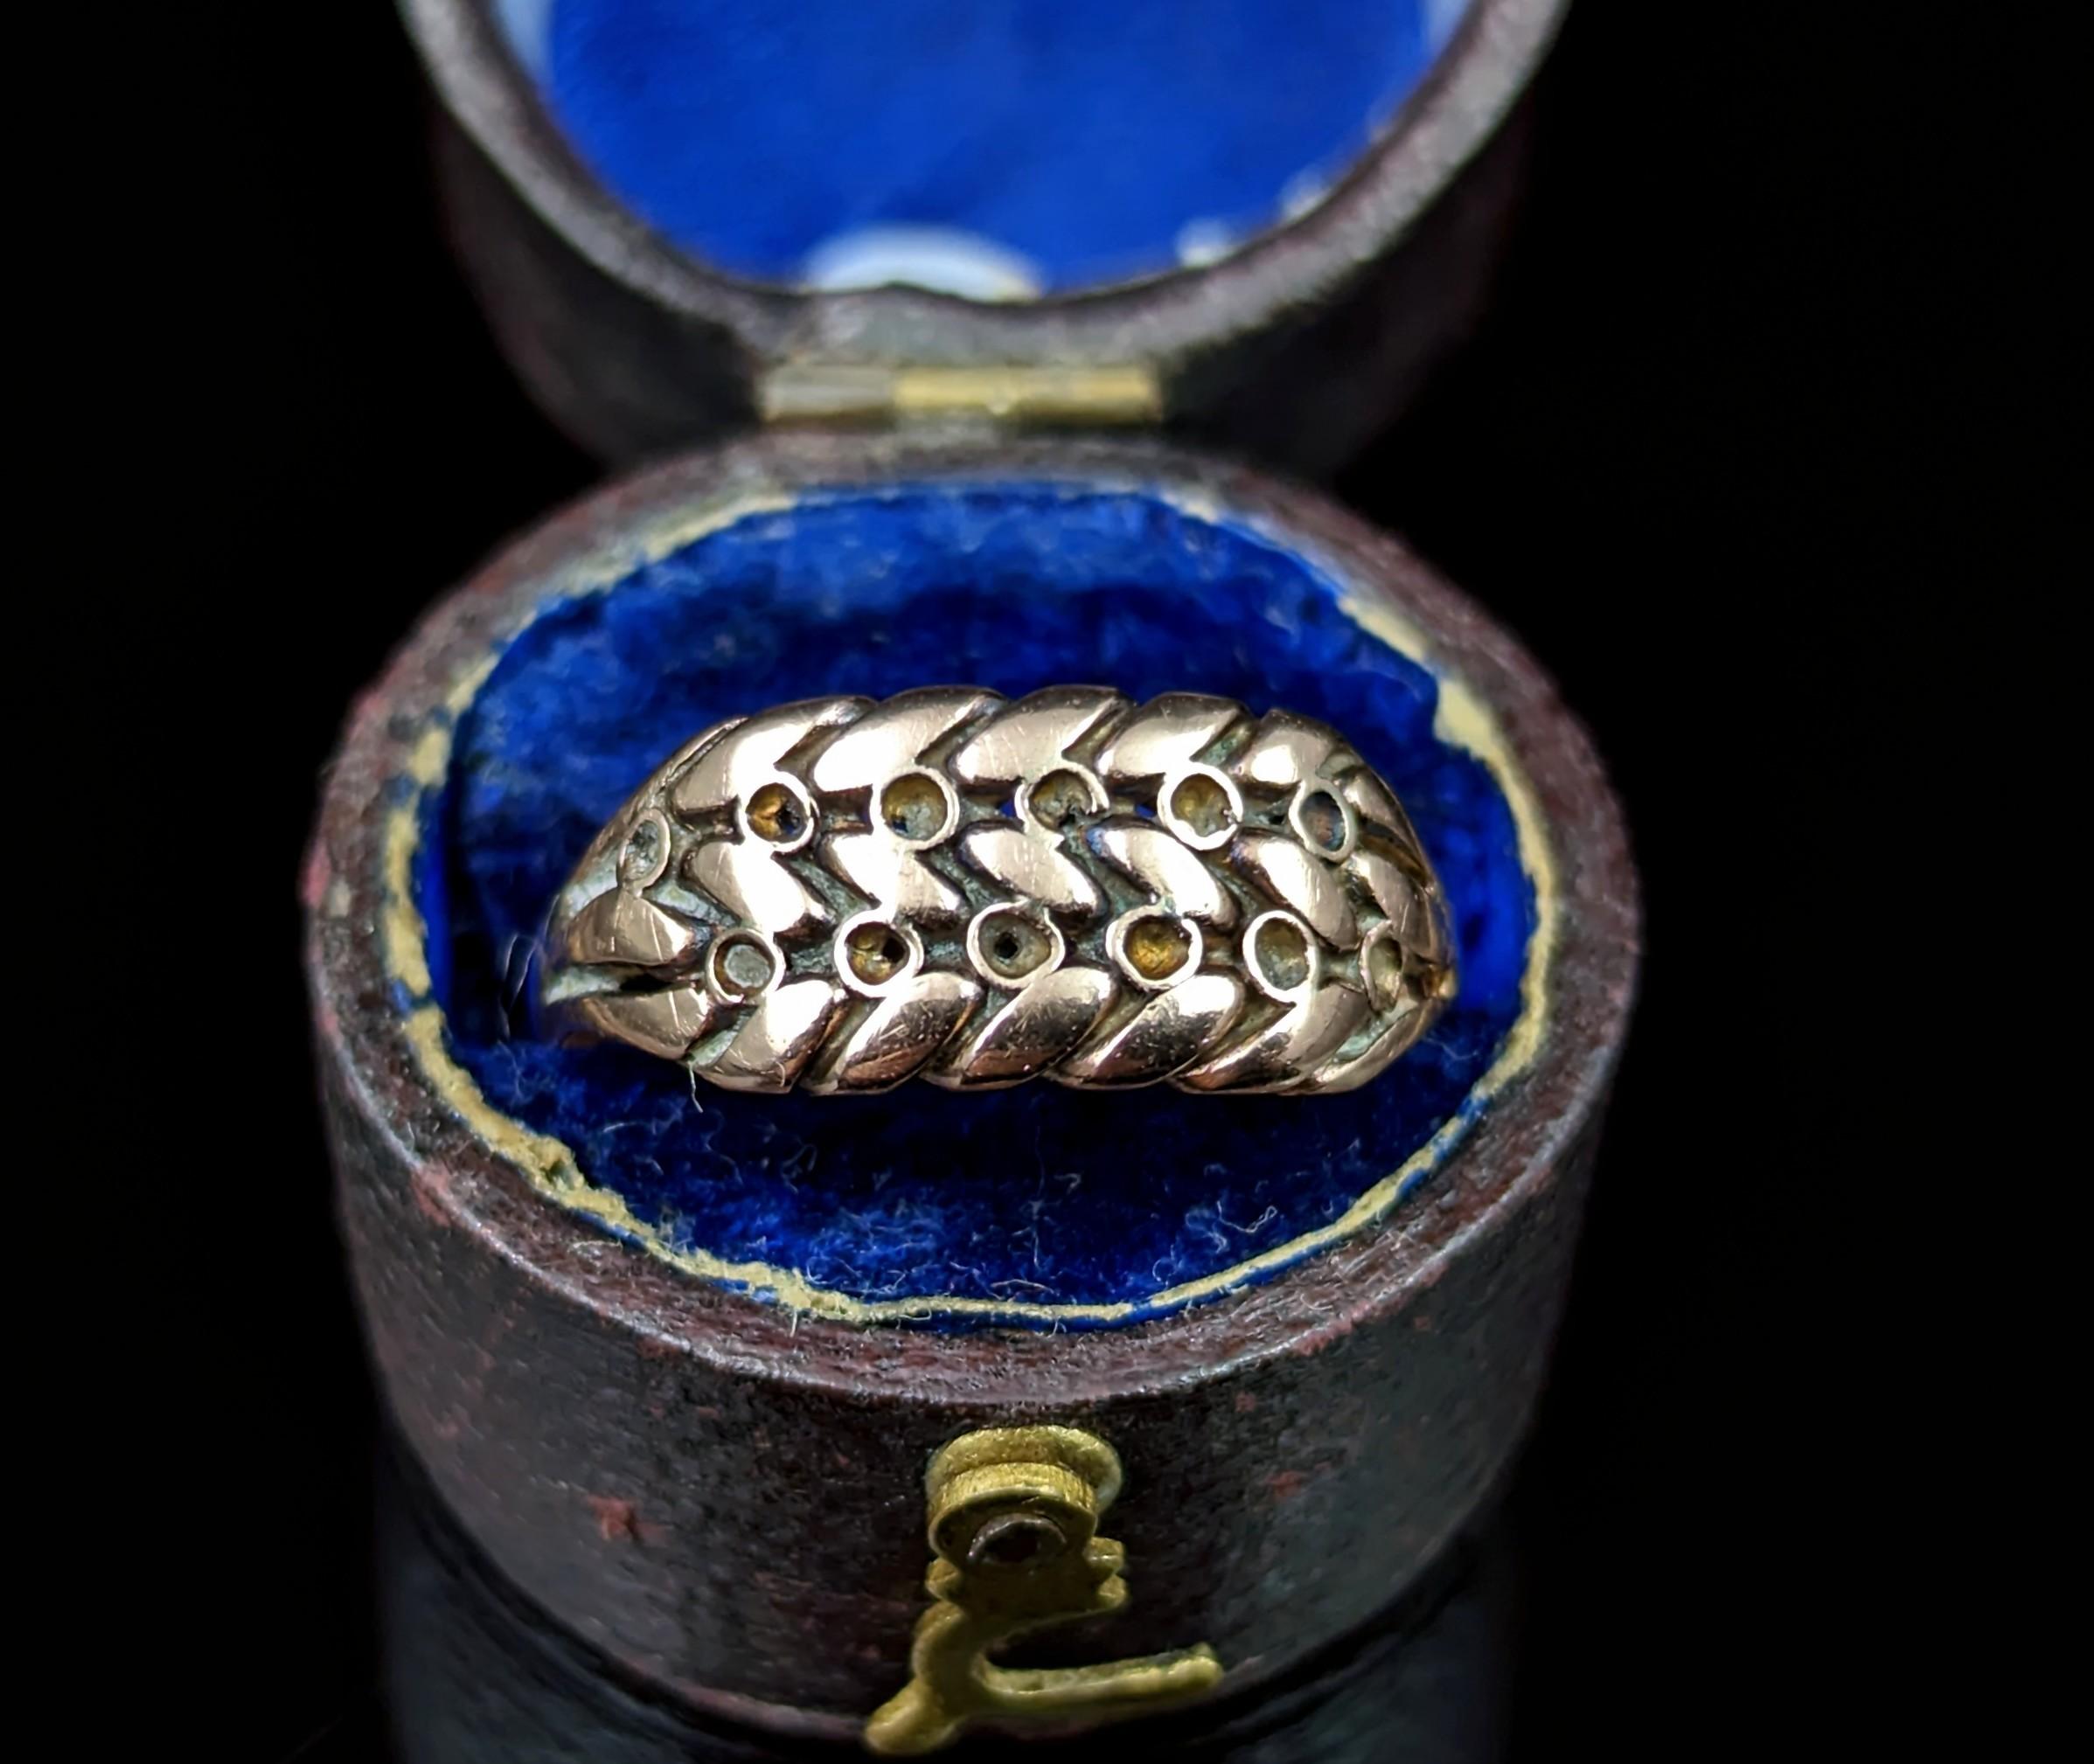 The keeper ring is a classic and highly sought after ring style, like this antique Edwardian era 9kt rose gold keeper ring.

The face is made up from a scrolling knot with beading and this leads to the bifurcated shoulders and smooth gold band.

The